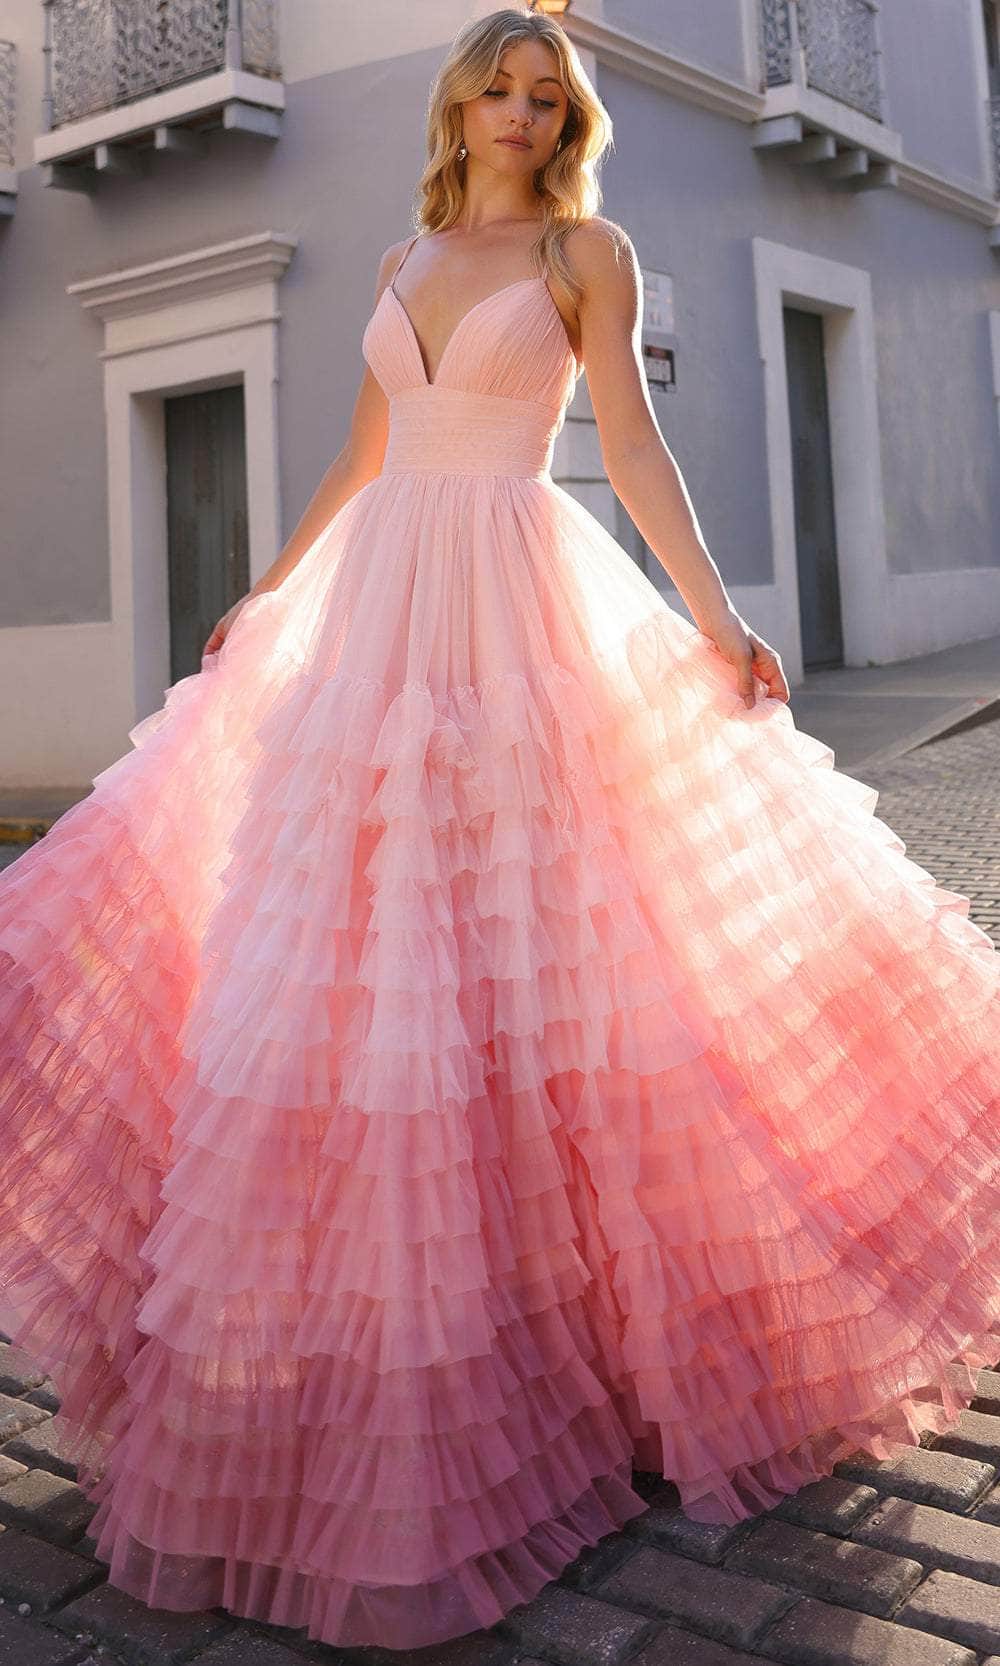 Nox Anabel C1420 - Ombre Ruffled Prom Dress Special Occasion Dress 0 / Blush Ombre